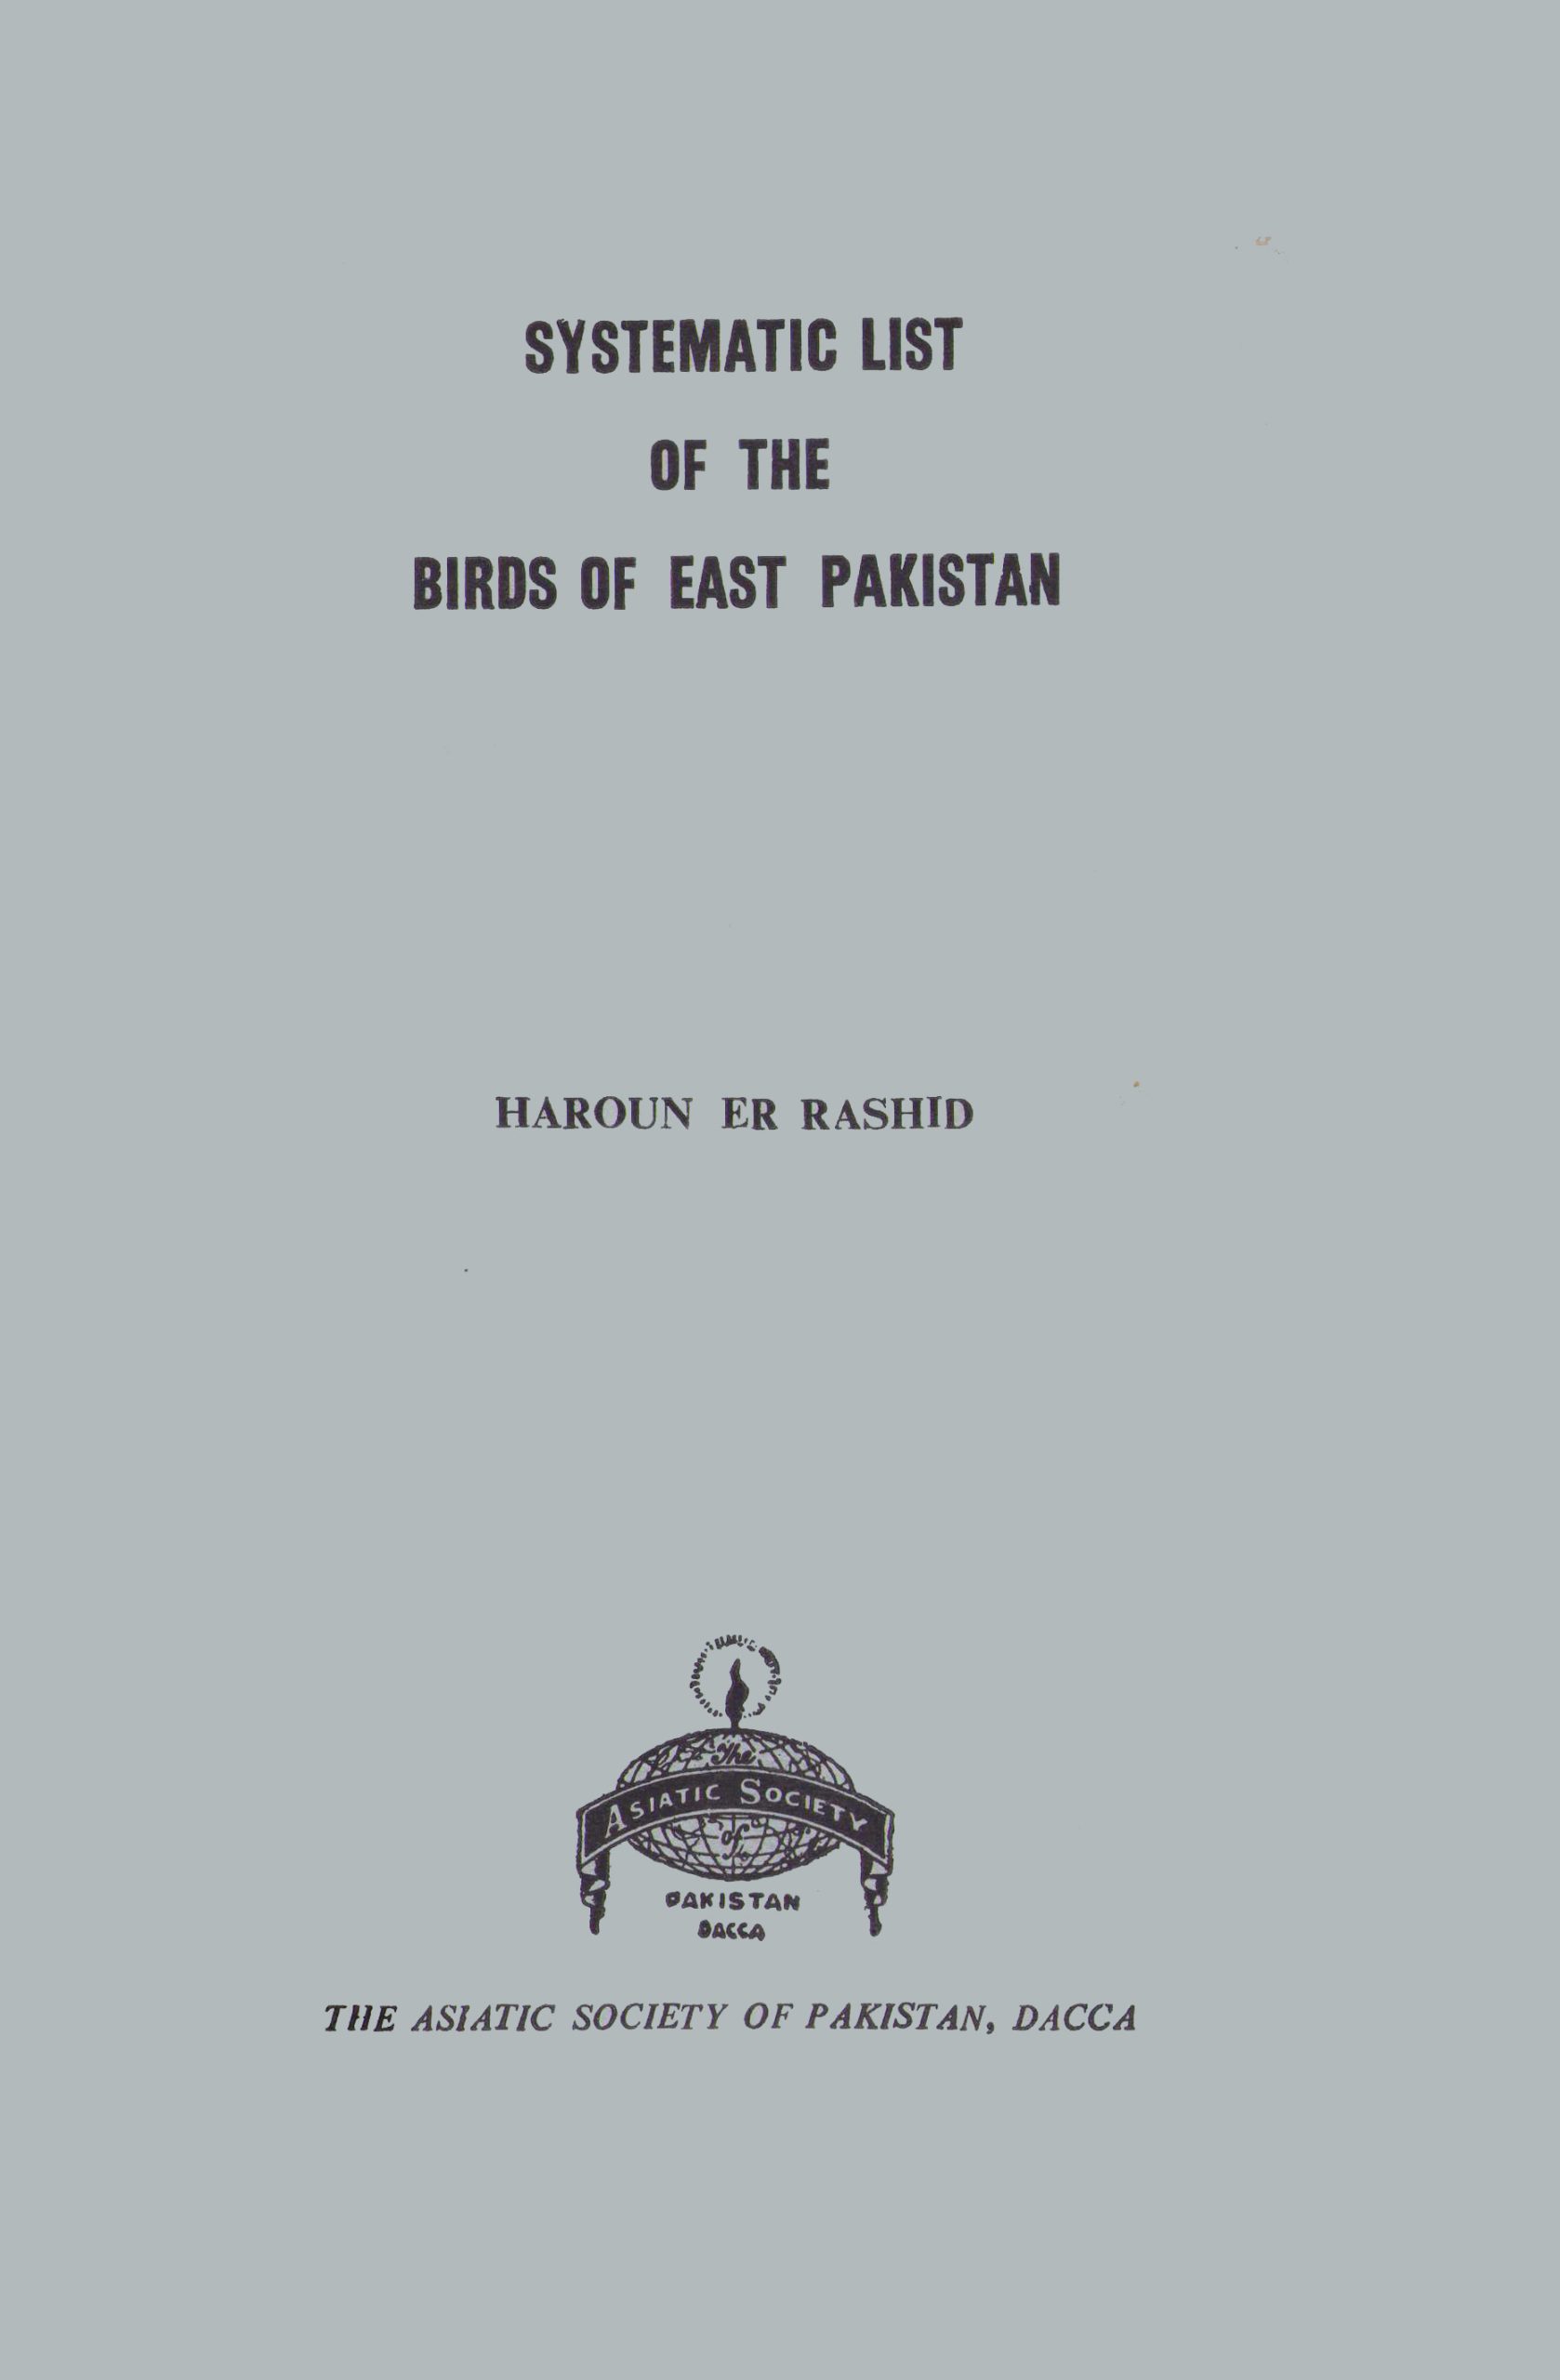 ASBP_024_Systematic List of the Birds of East Pakistan by Haroun-Er-Rashid (1967)